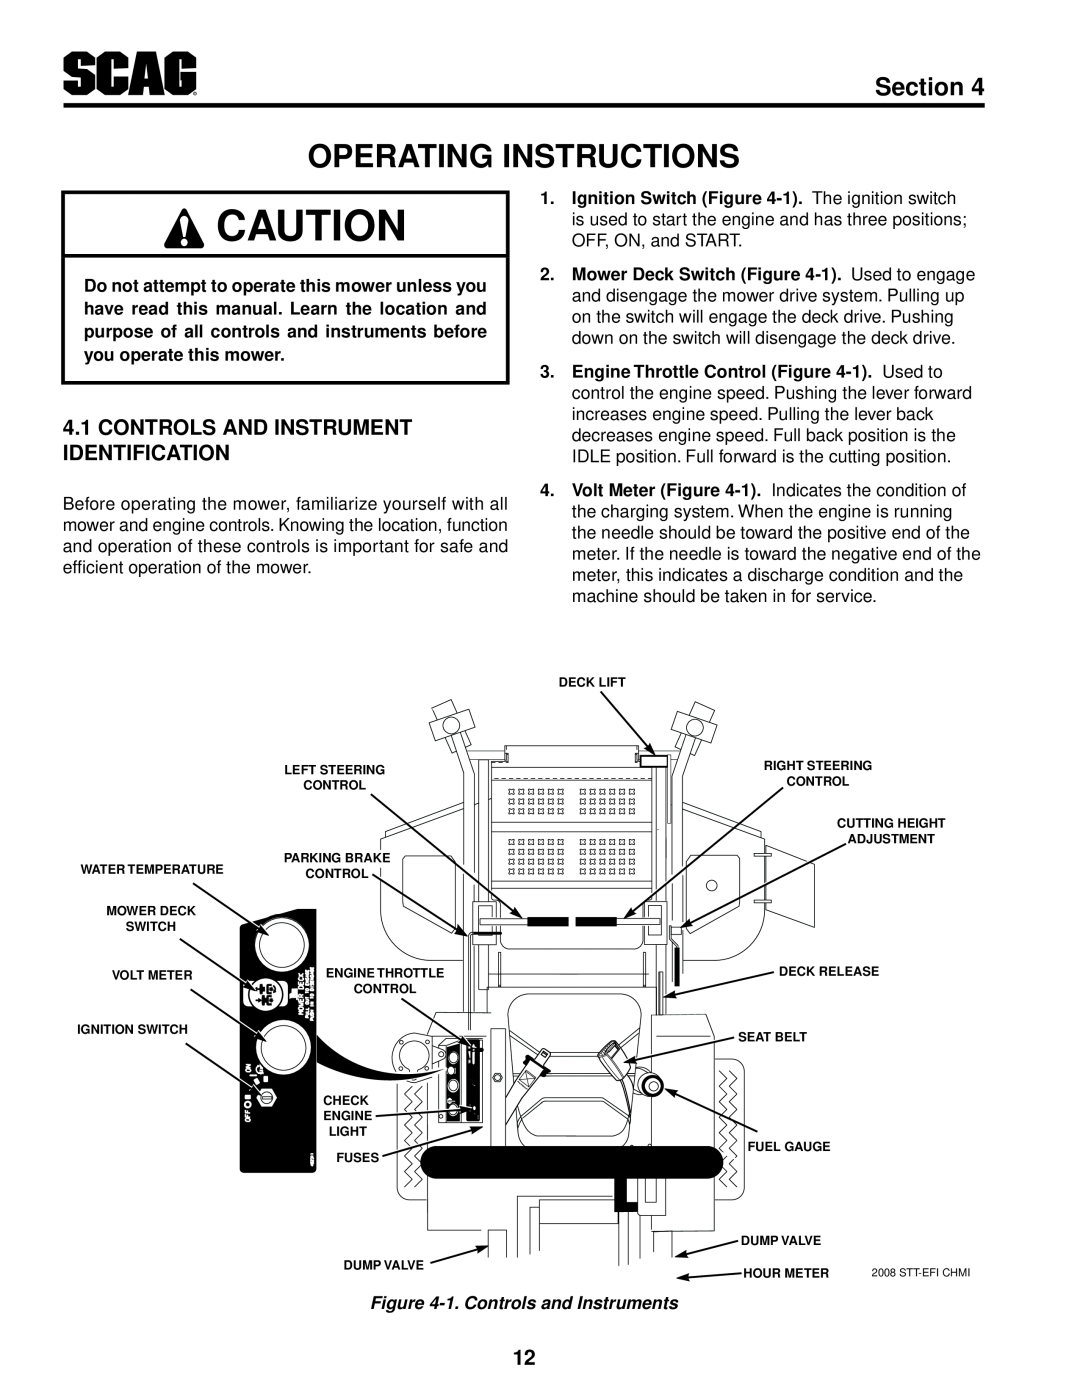 Scag Power Equipment STT61V-31EFI-SS manual Operating Instructions, Controls And Instrument Identification, Section 